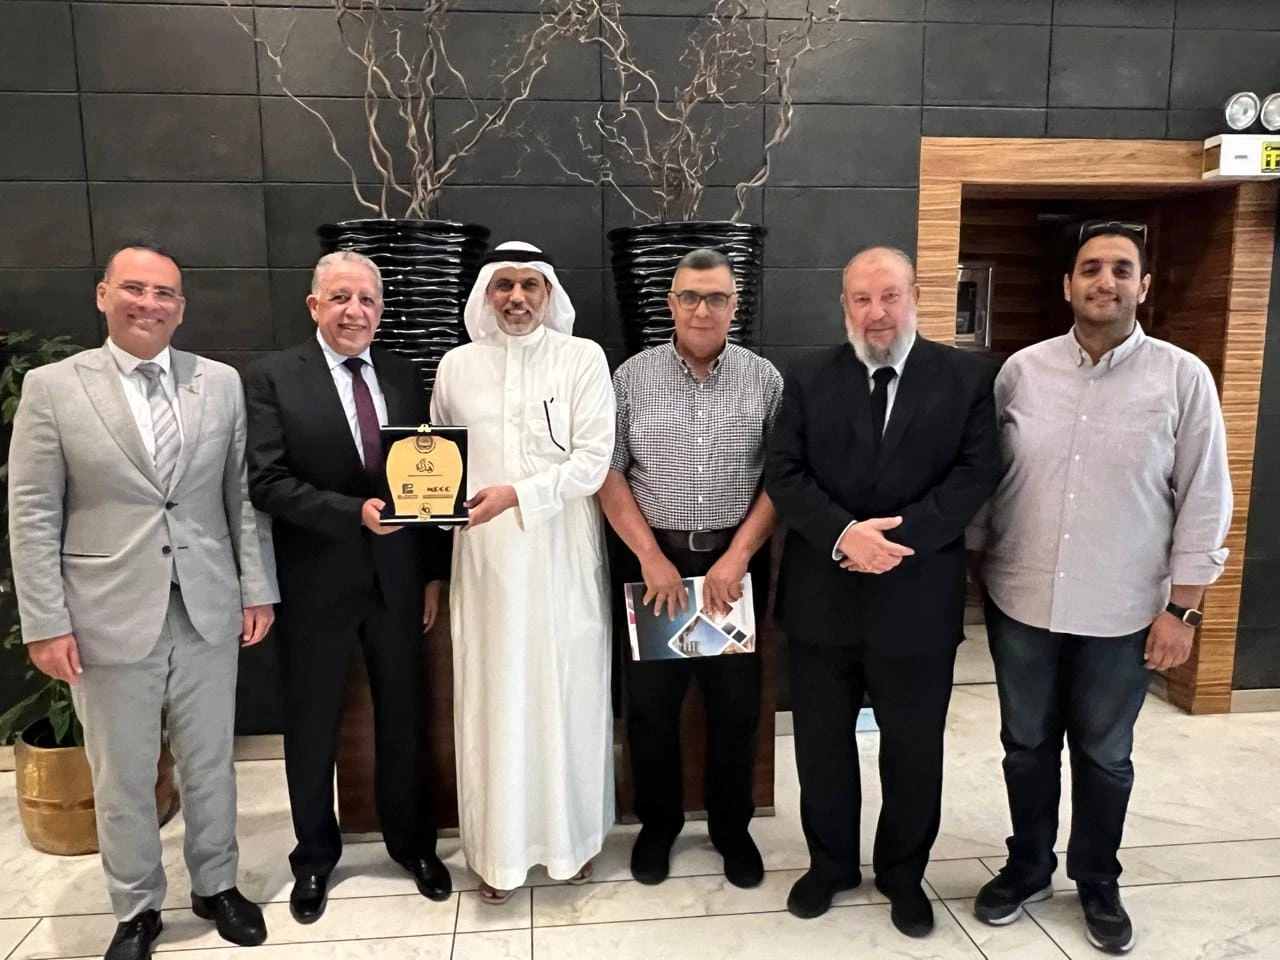 Visit of the Dean of Port Training Institute and Research and Consultation Center for the Maritime Transport Sector, AASTMT to King Abdulaziz Port in Dammam, Saudi Arabia5